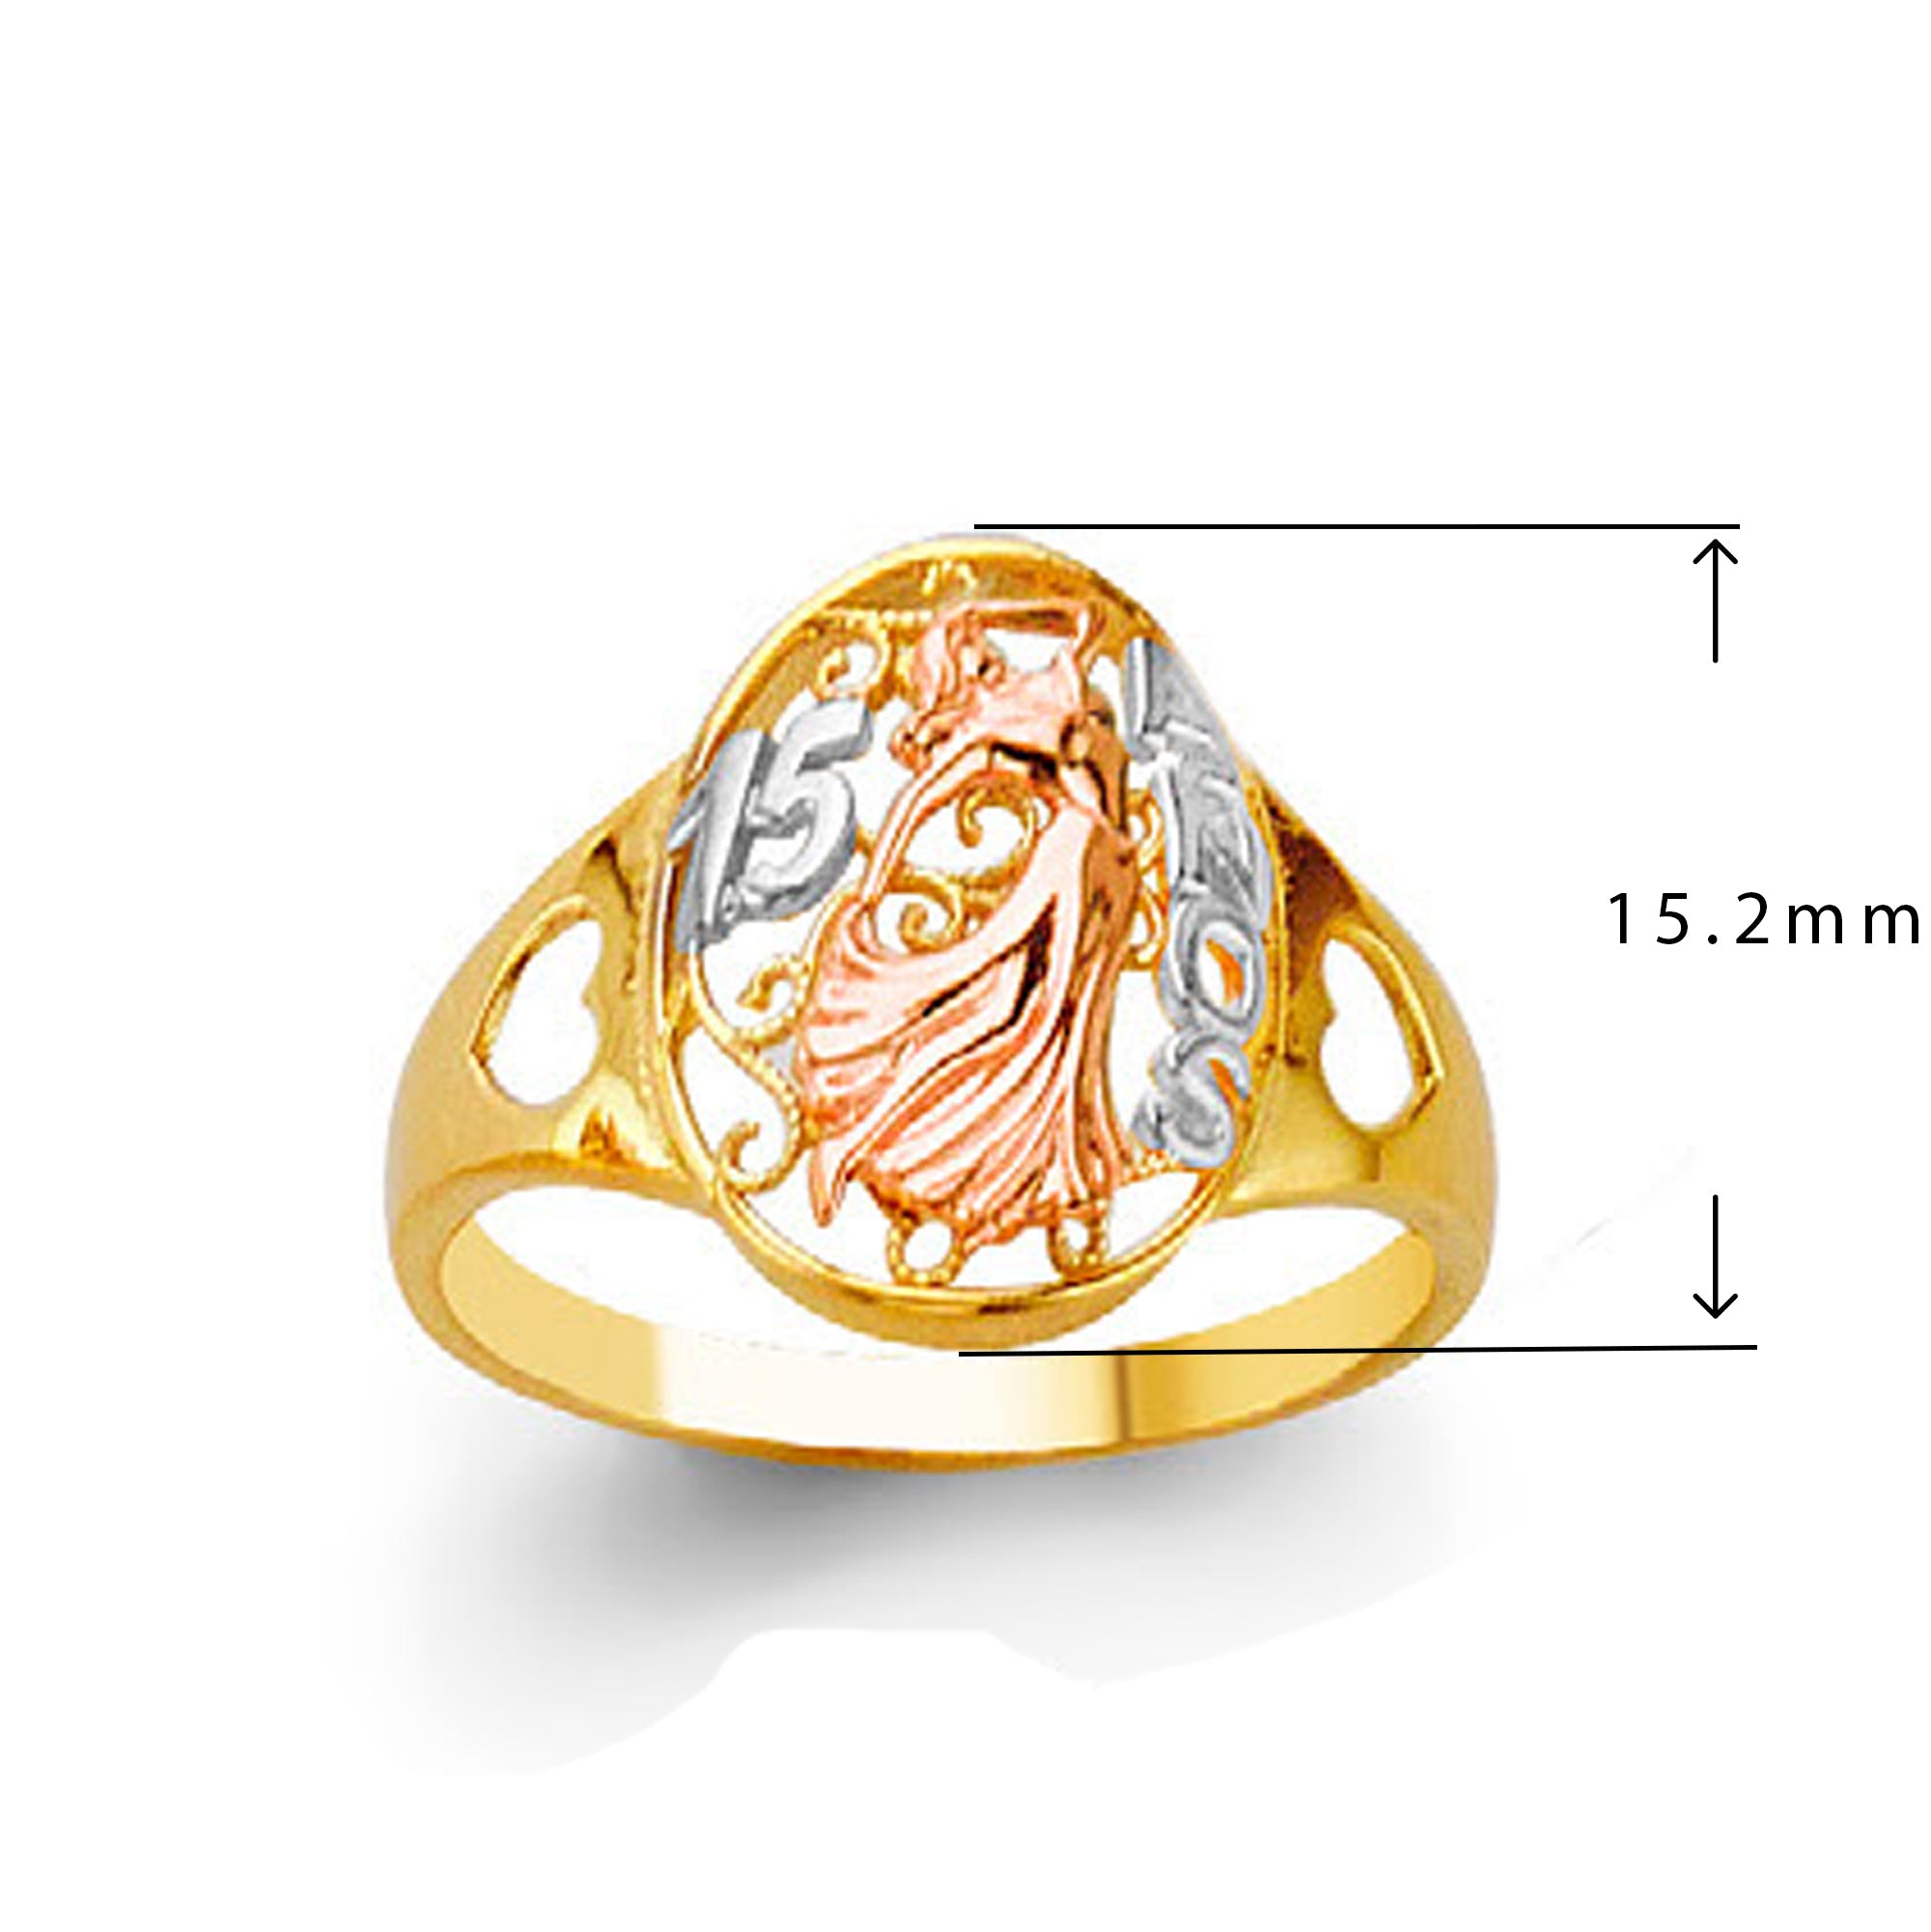 Multi-hued Oval Filigree Anos Ring in Solid Gold with Measurement